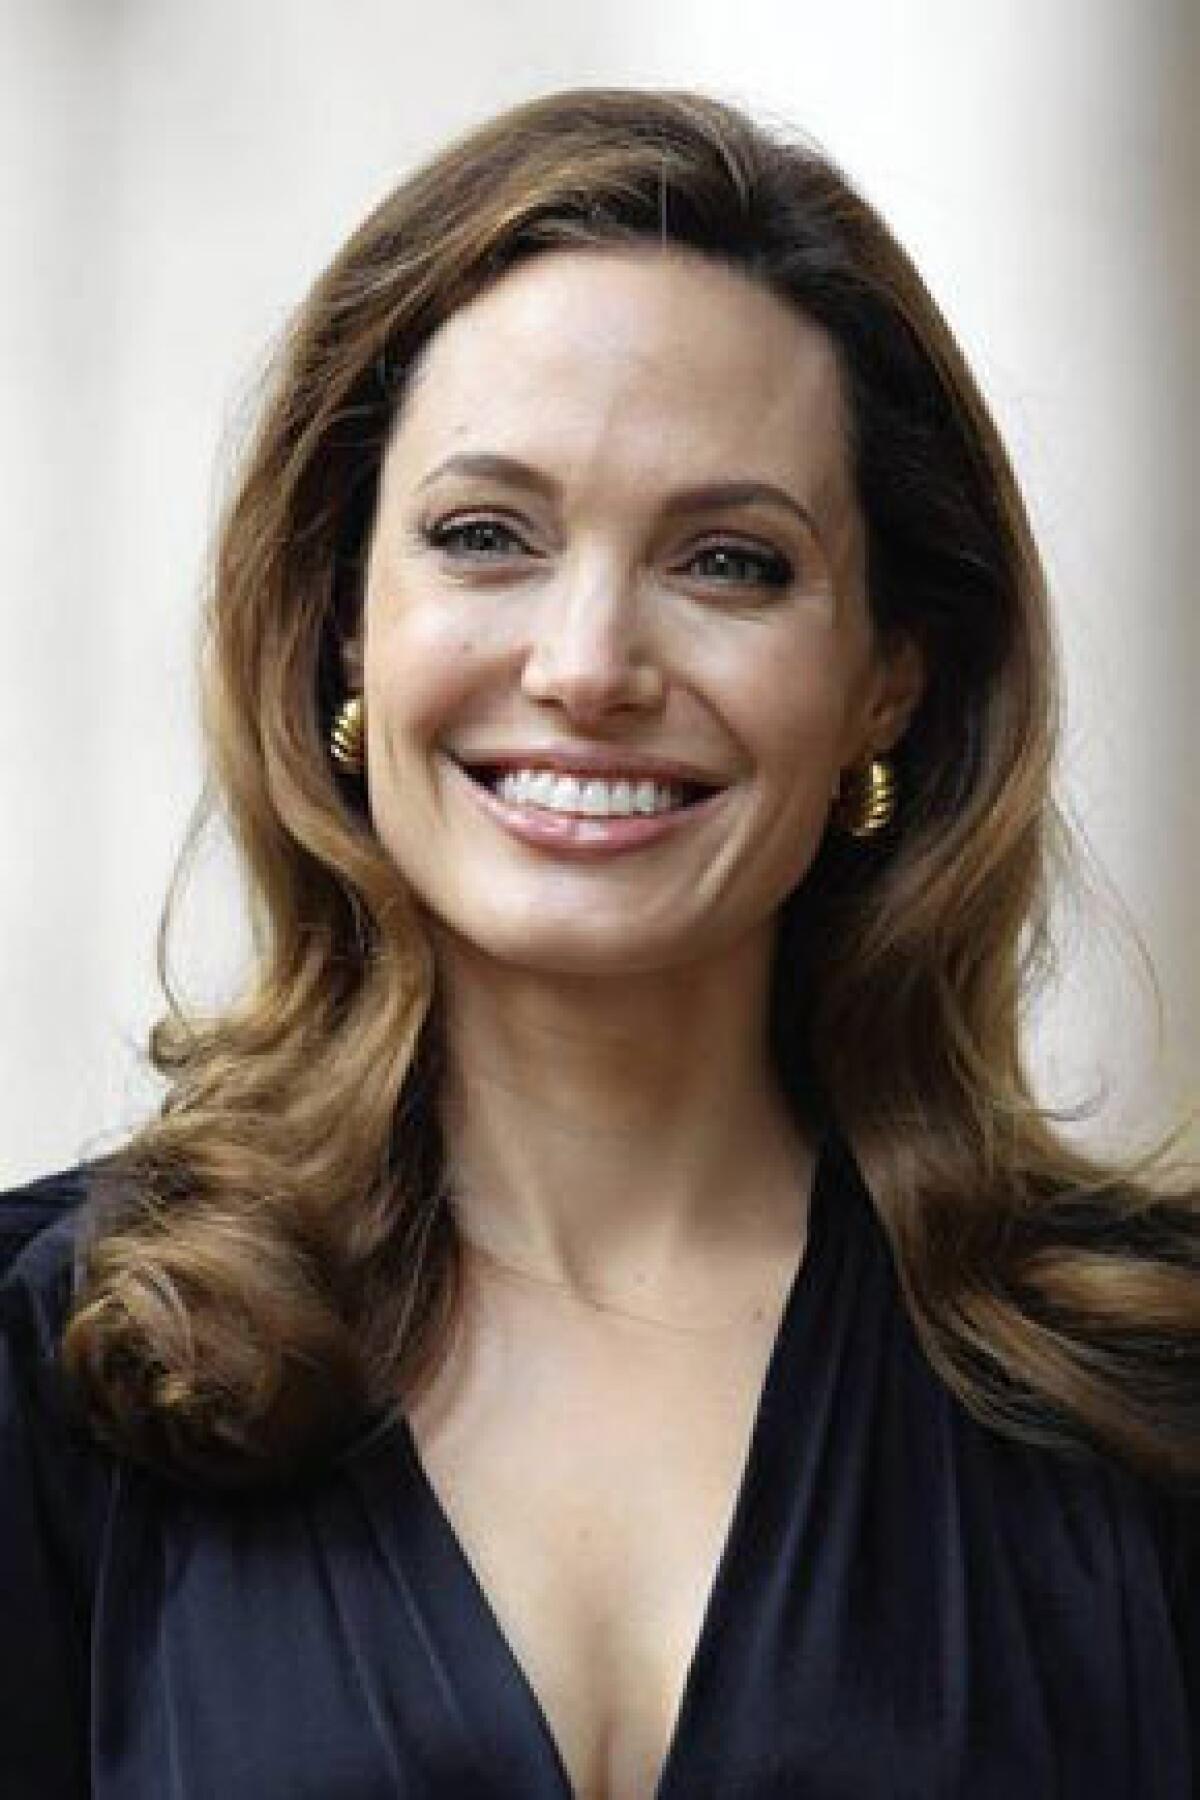 Angelina Jolie joins a growing number of women who have used genetic testing to take control of their health.